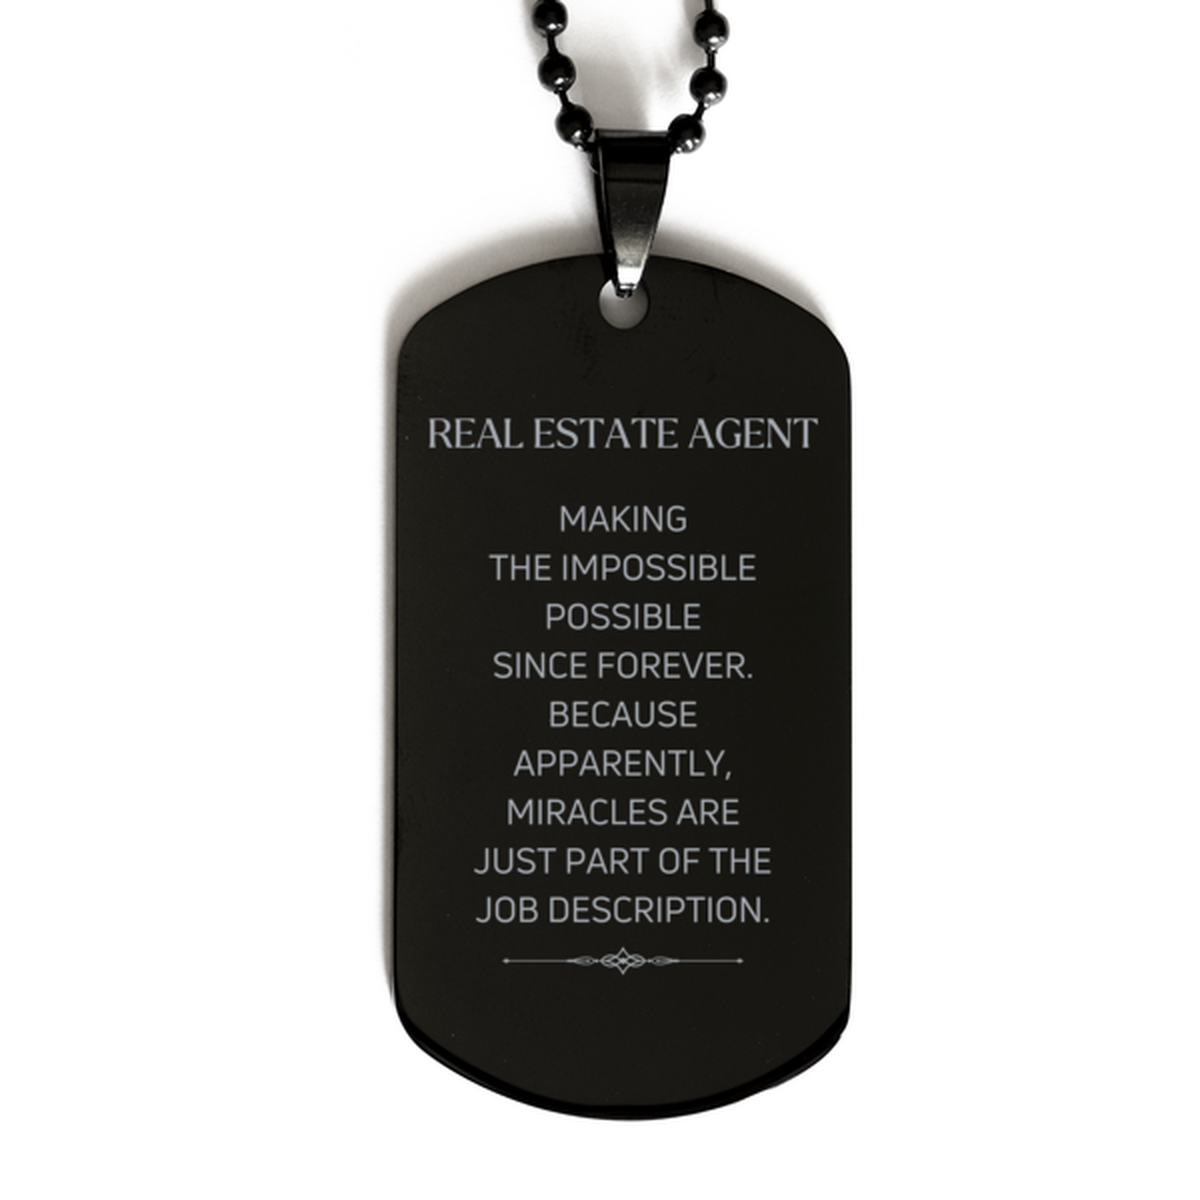 Funny Real Estate Agent Gifts, Miracles are just part of the job description, Inspirational Birthday Black Dog Tag For Real Estate Agent, Men, Women, Coworkers, Friends, Boss